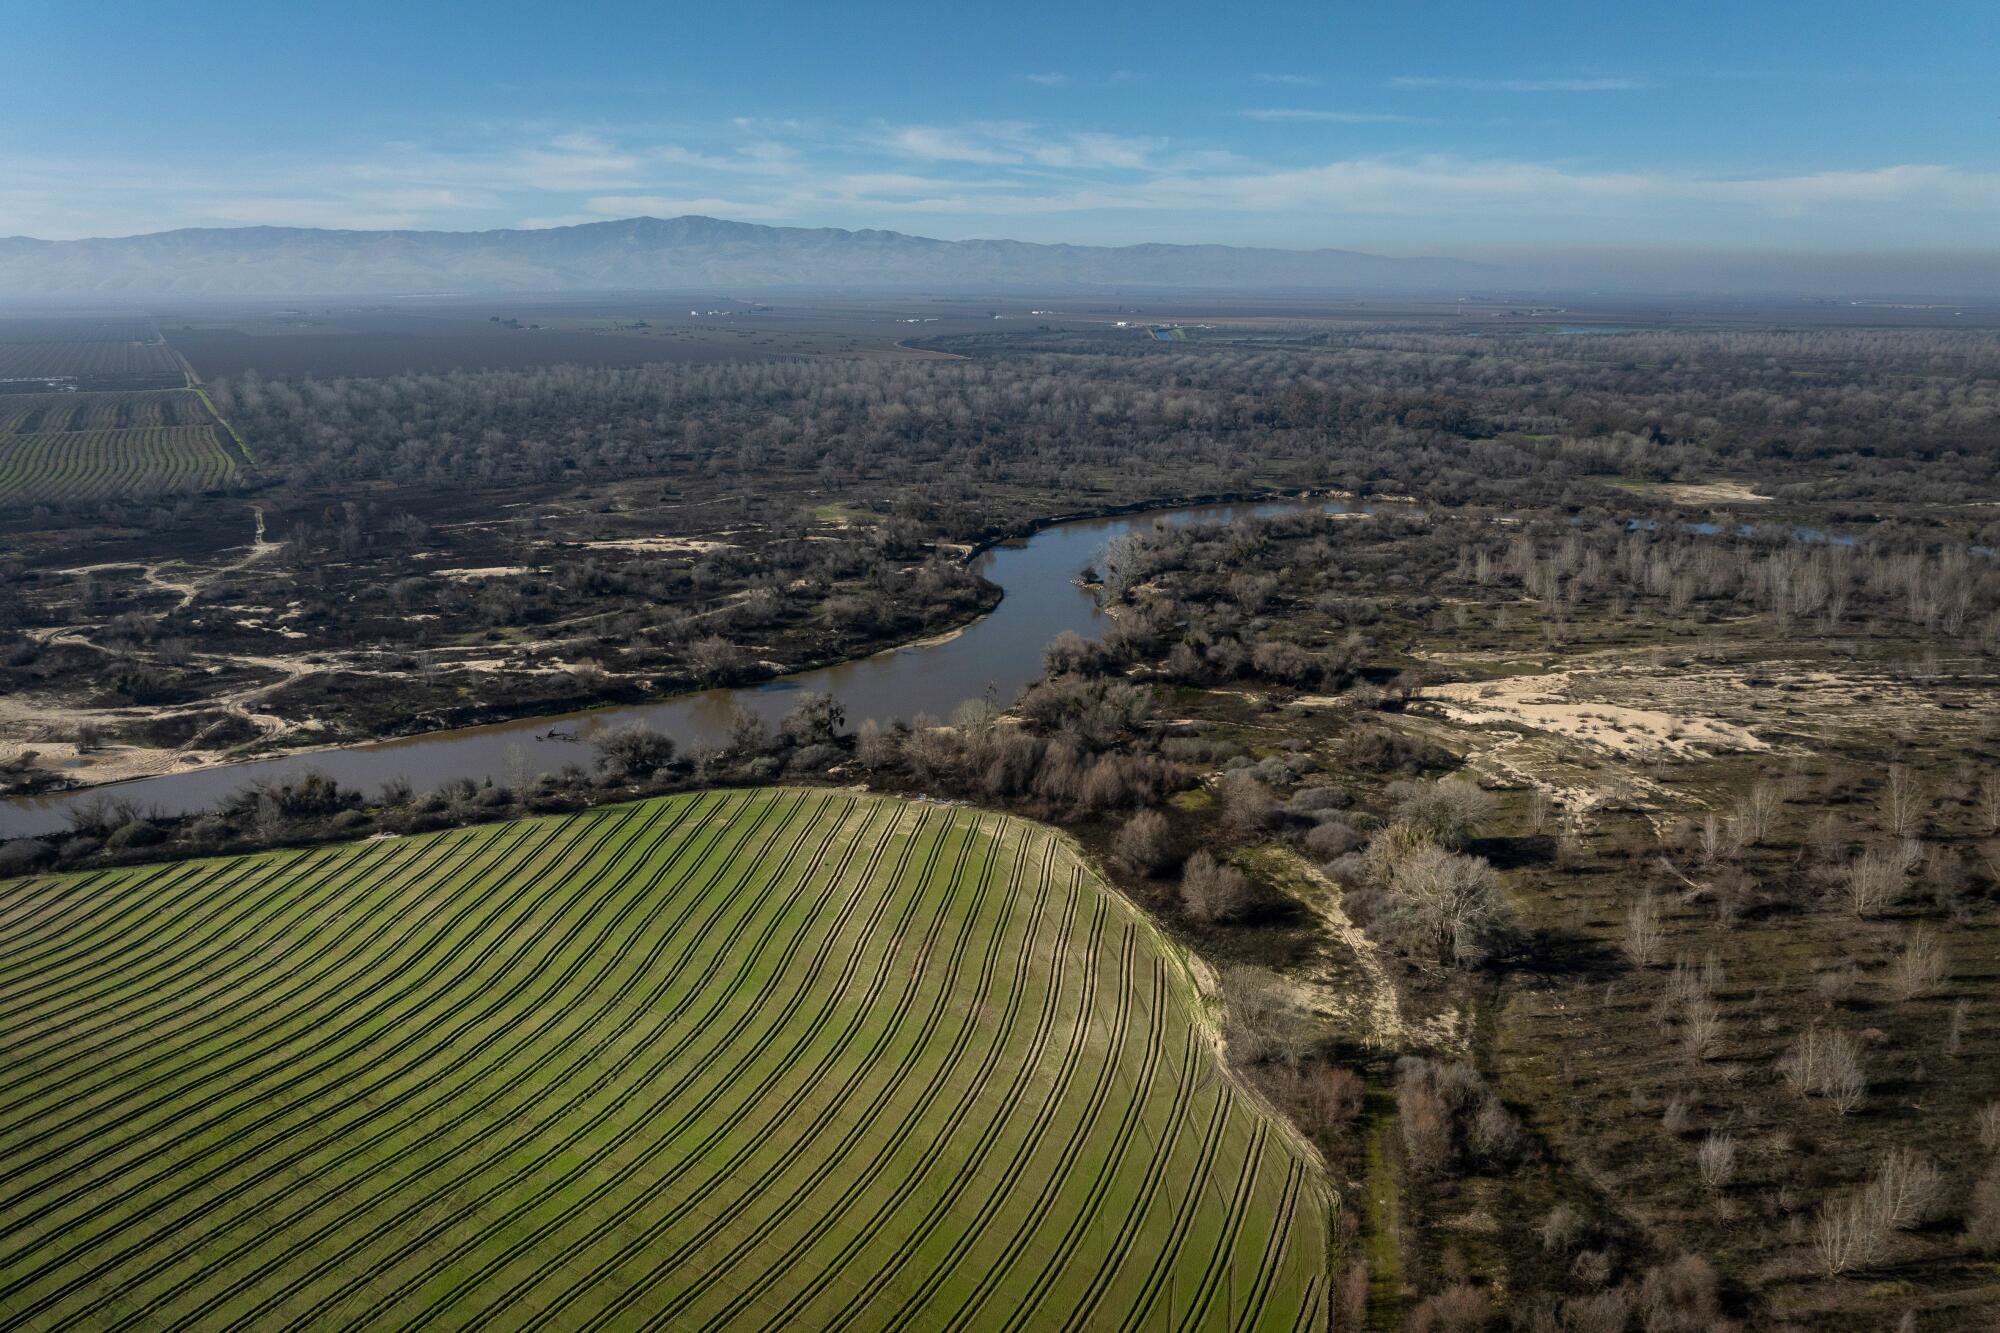 An aerial view of the San Joaquin River flowing past agricultural fields and forested land.